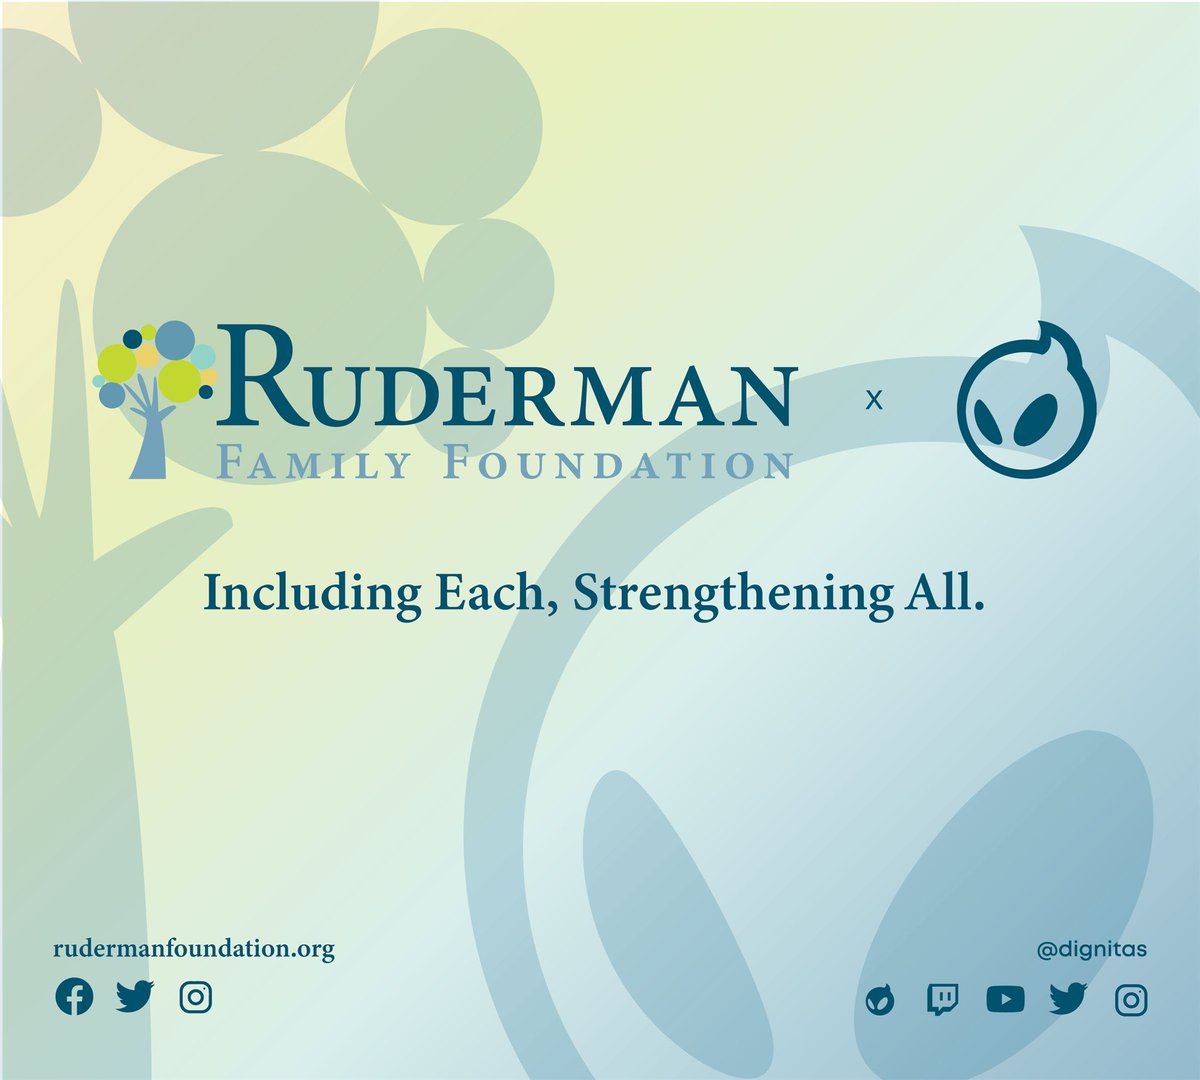 We’re excited to partner with The Ruderman Family Foundation! Mental health matters. Including each, strengthening all. #DIGxRuderman | #MentalHealth